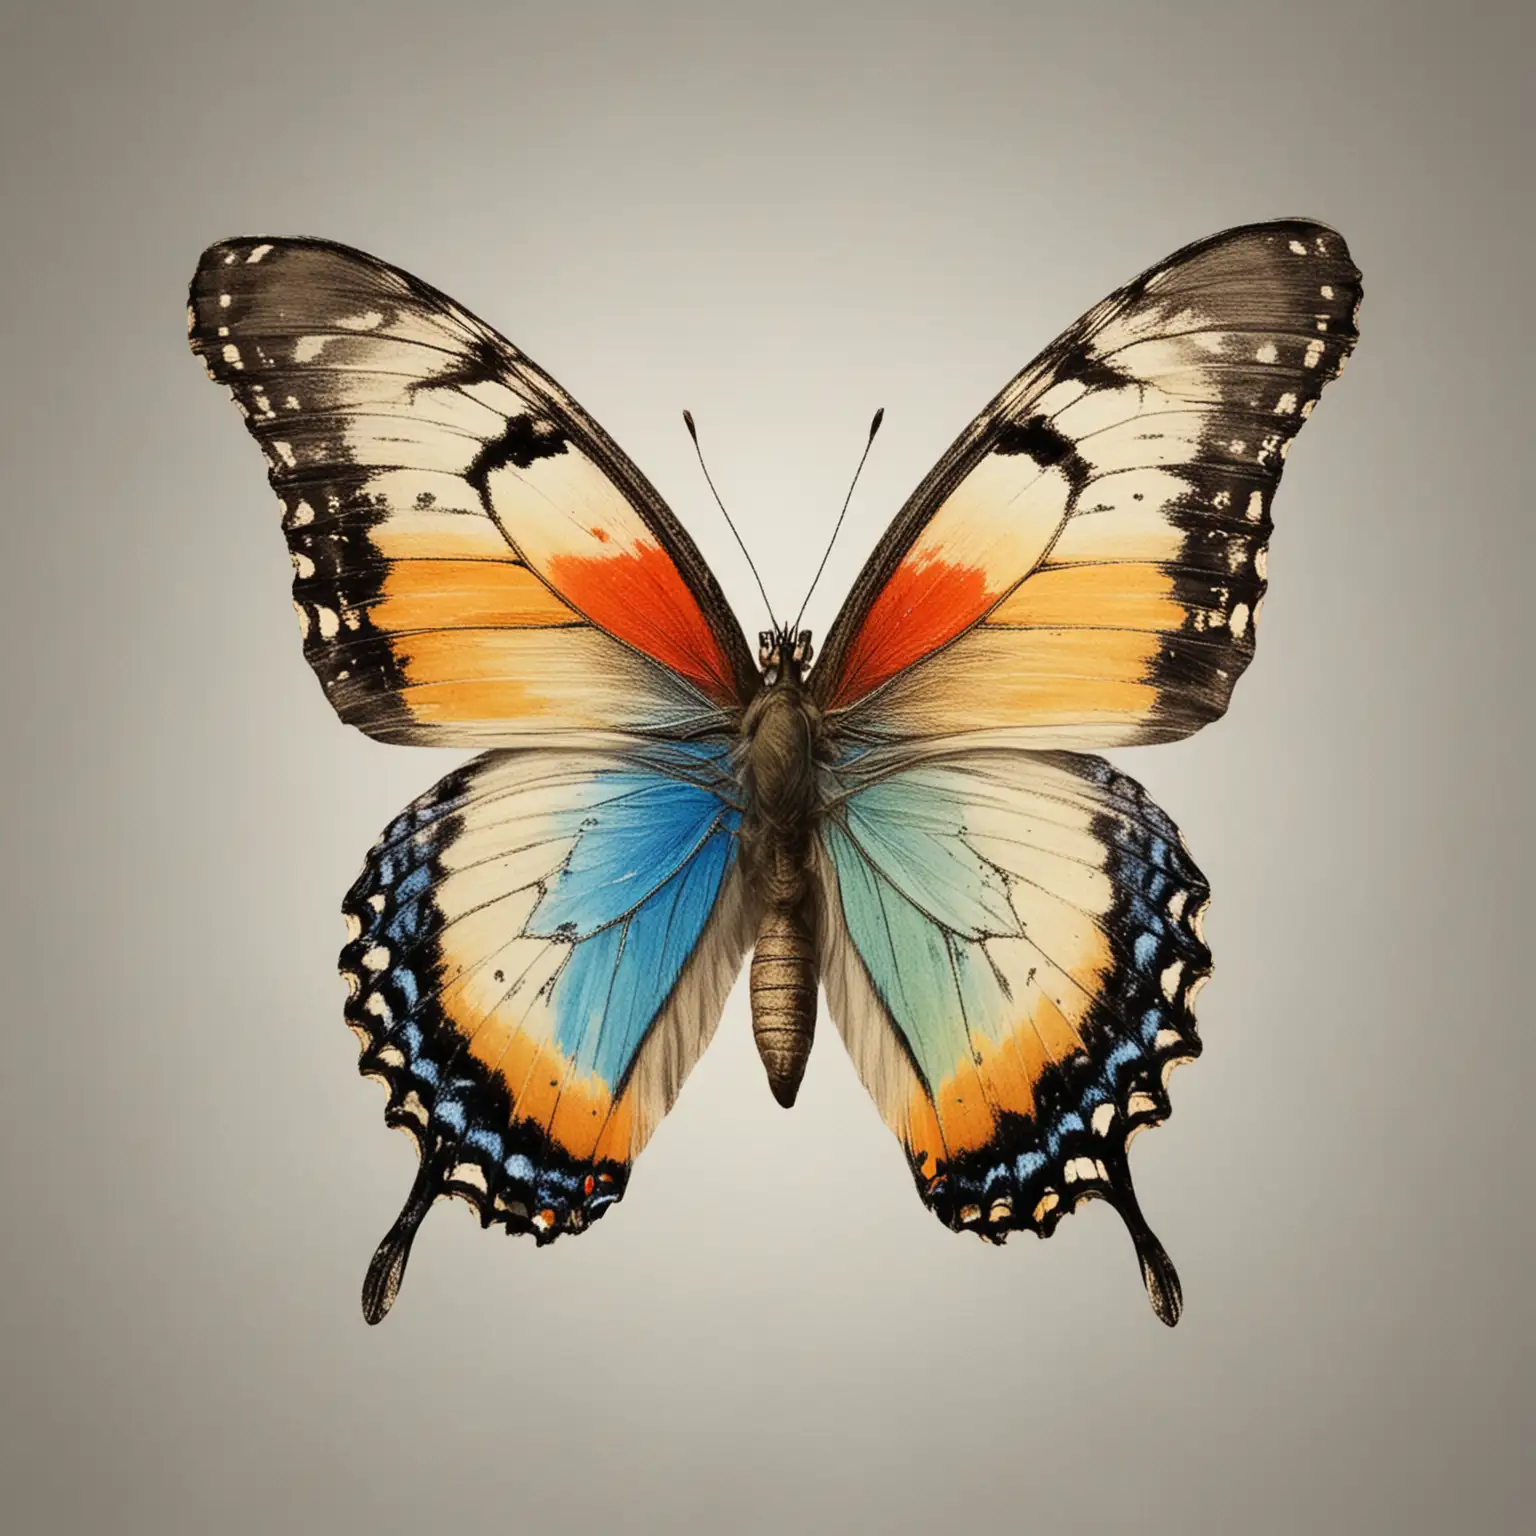 Colorful and Grayish Butterfly Split against Neutral Background